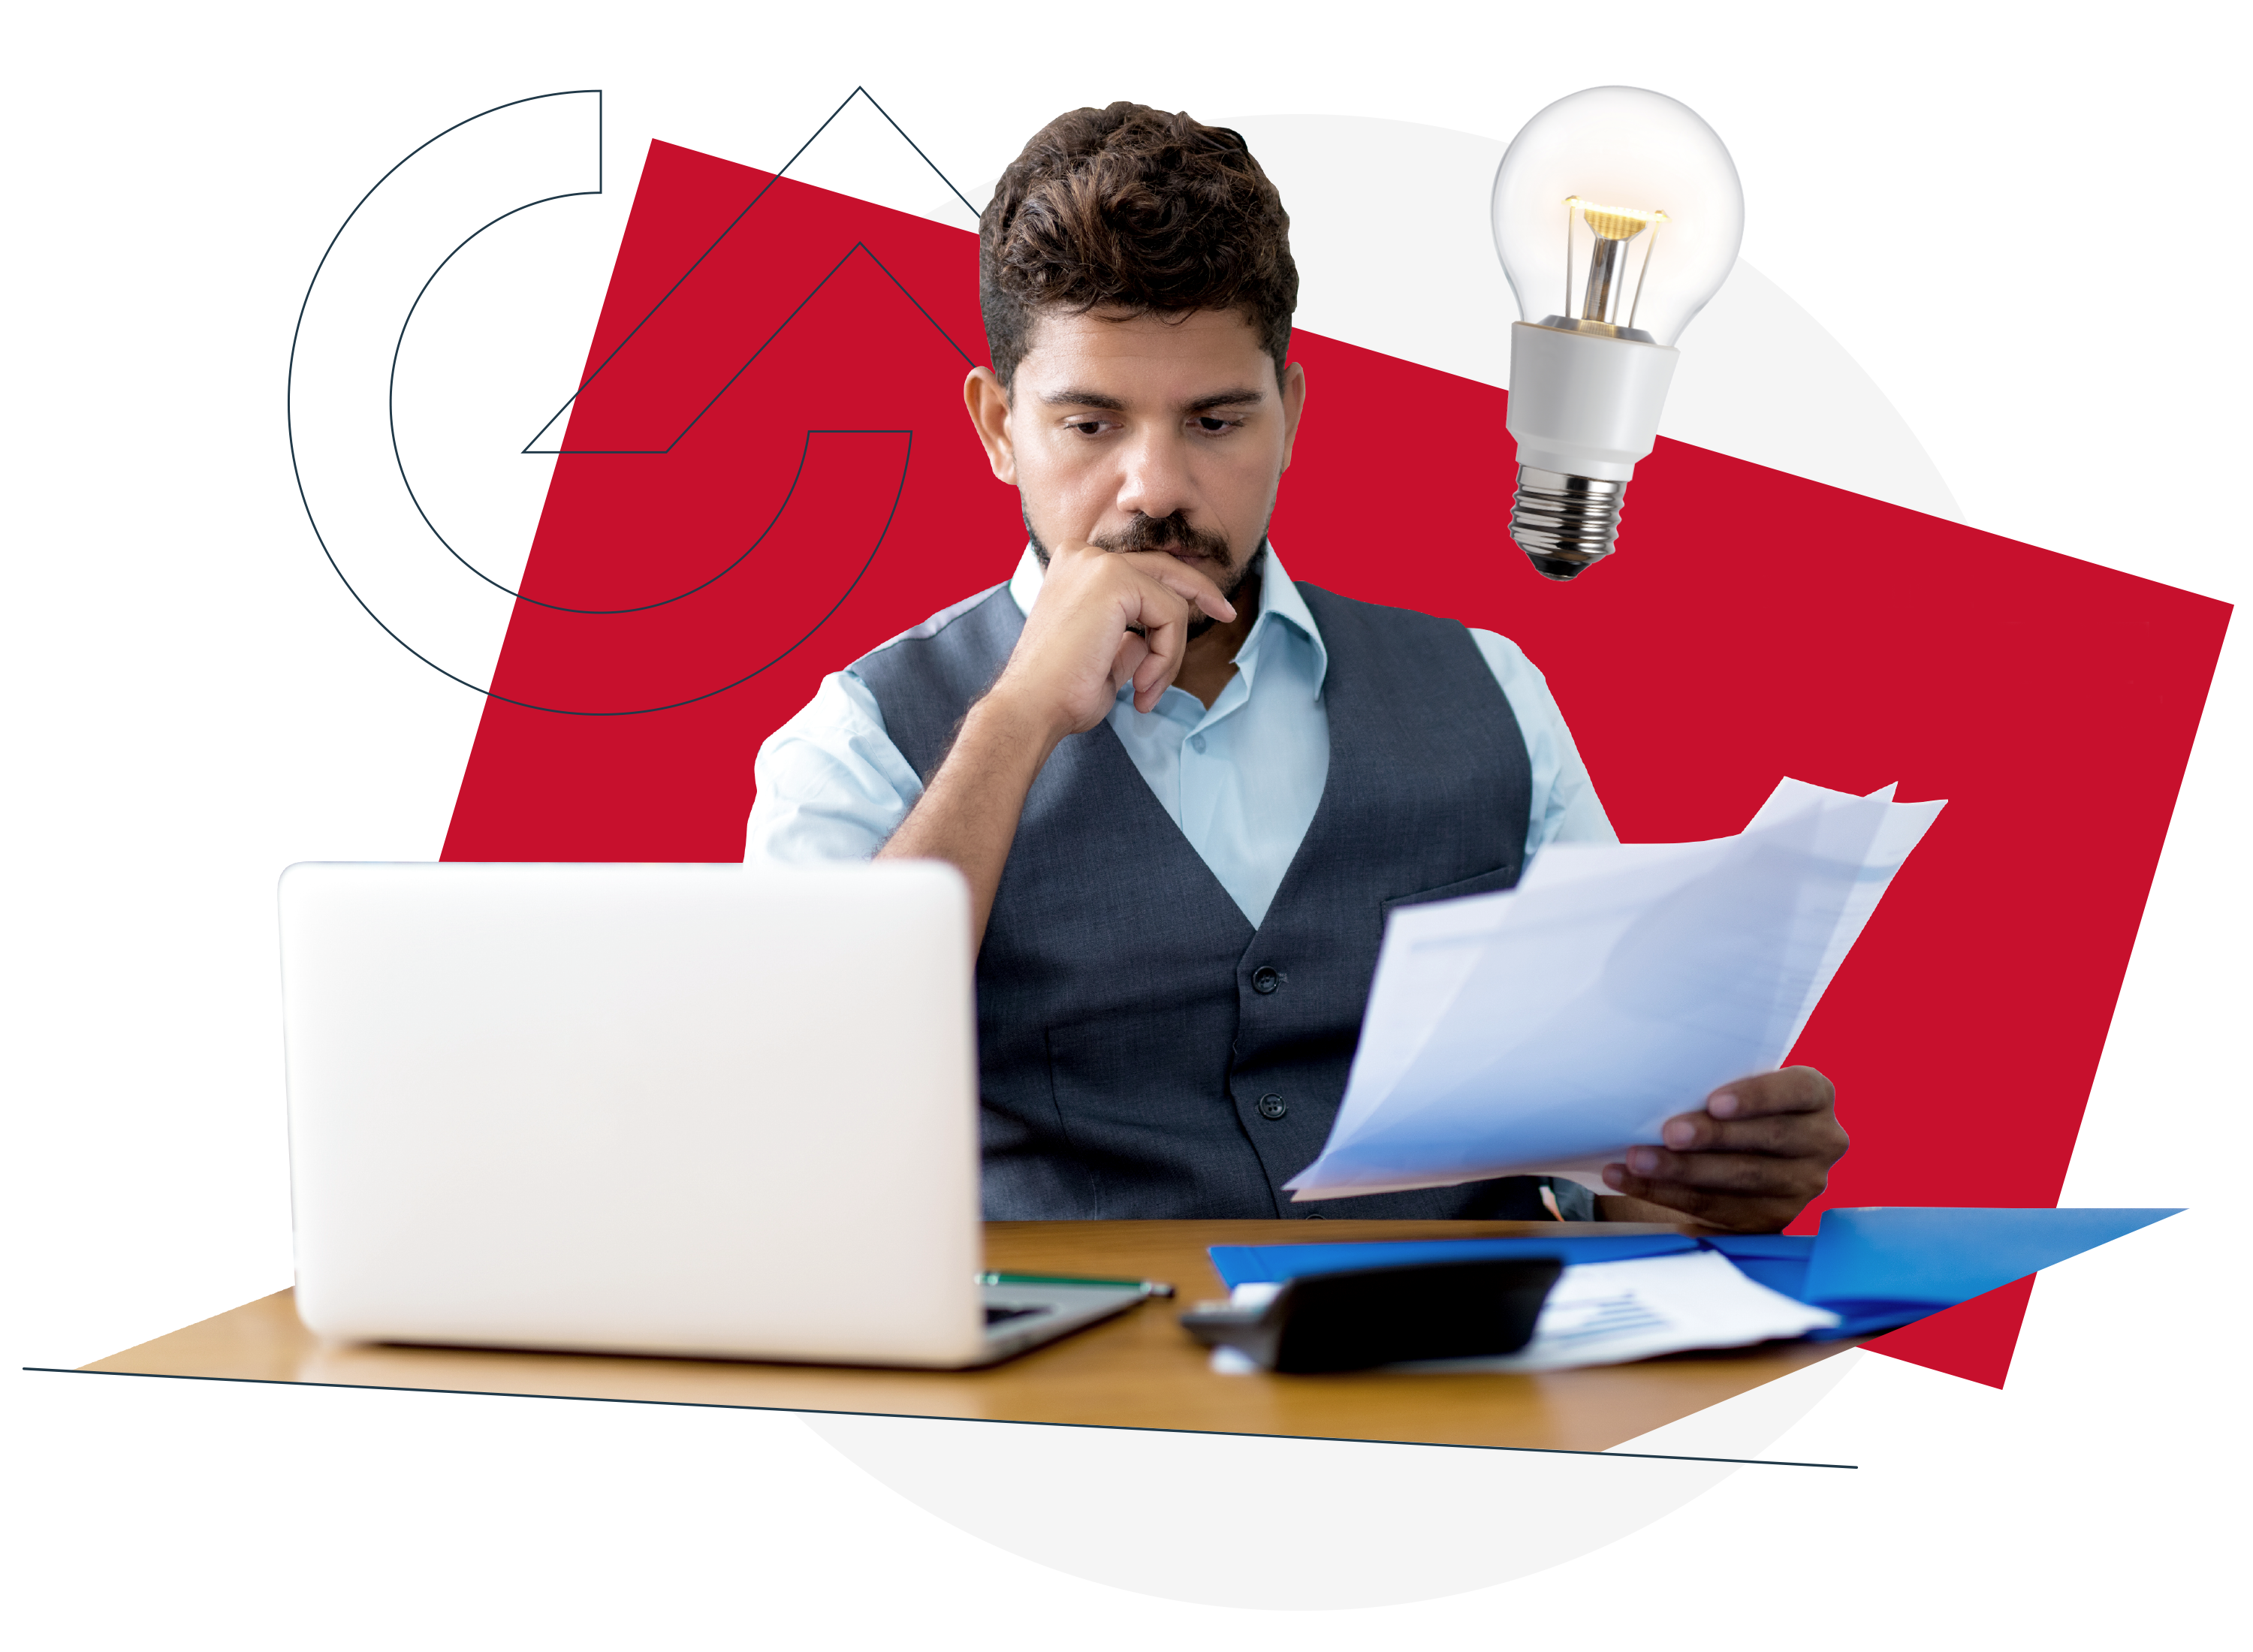 Man staring at a computer with papers in his hand. The G&A logo and red color is placed behind him.